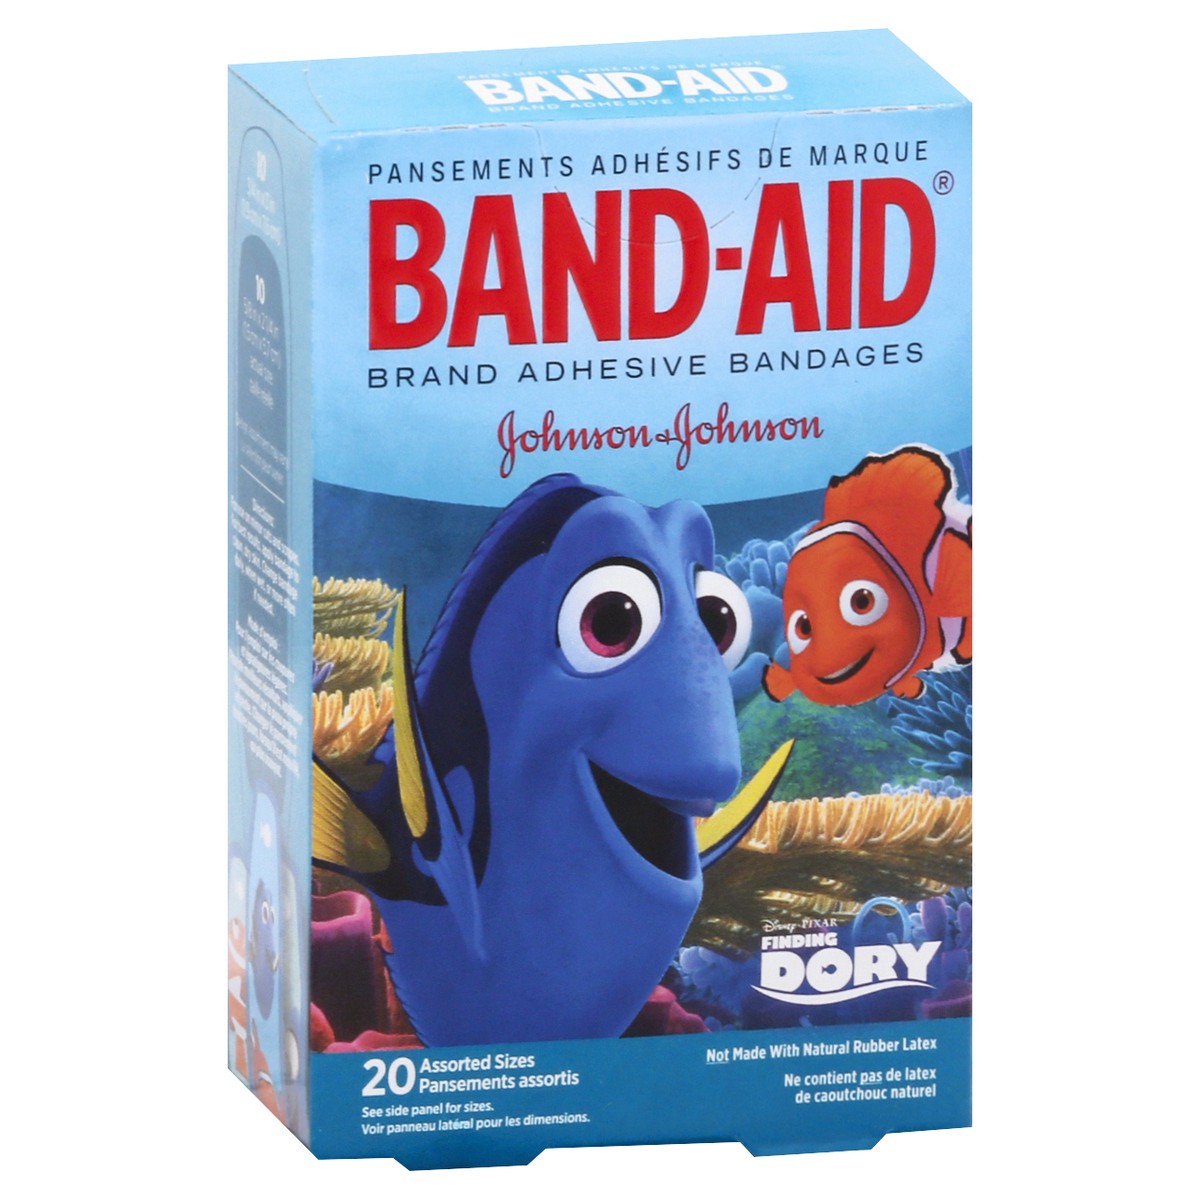 slide 2 of 9, BAND-AID Adhesive Bandages for Minor Cuts and Scrapes, Featuring Disney/Pixar Finding Dory Characters for Kids, Assorted Sizes 20 ct, 20 ct